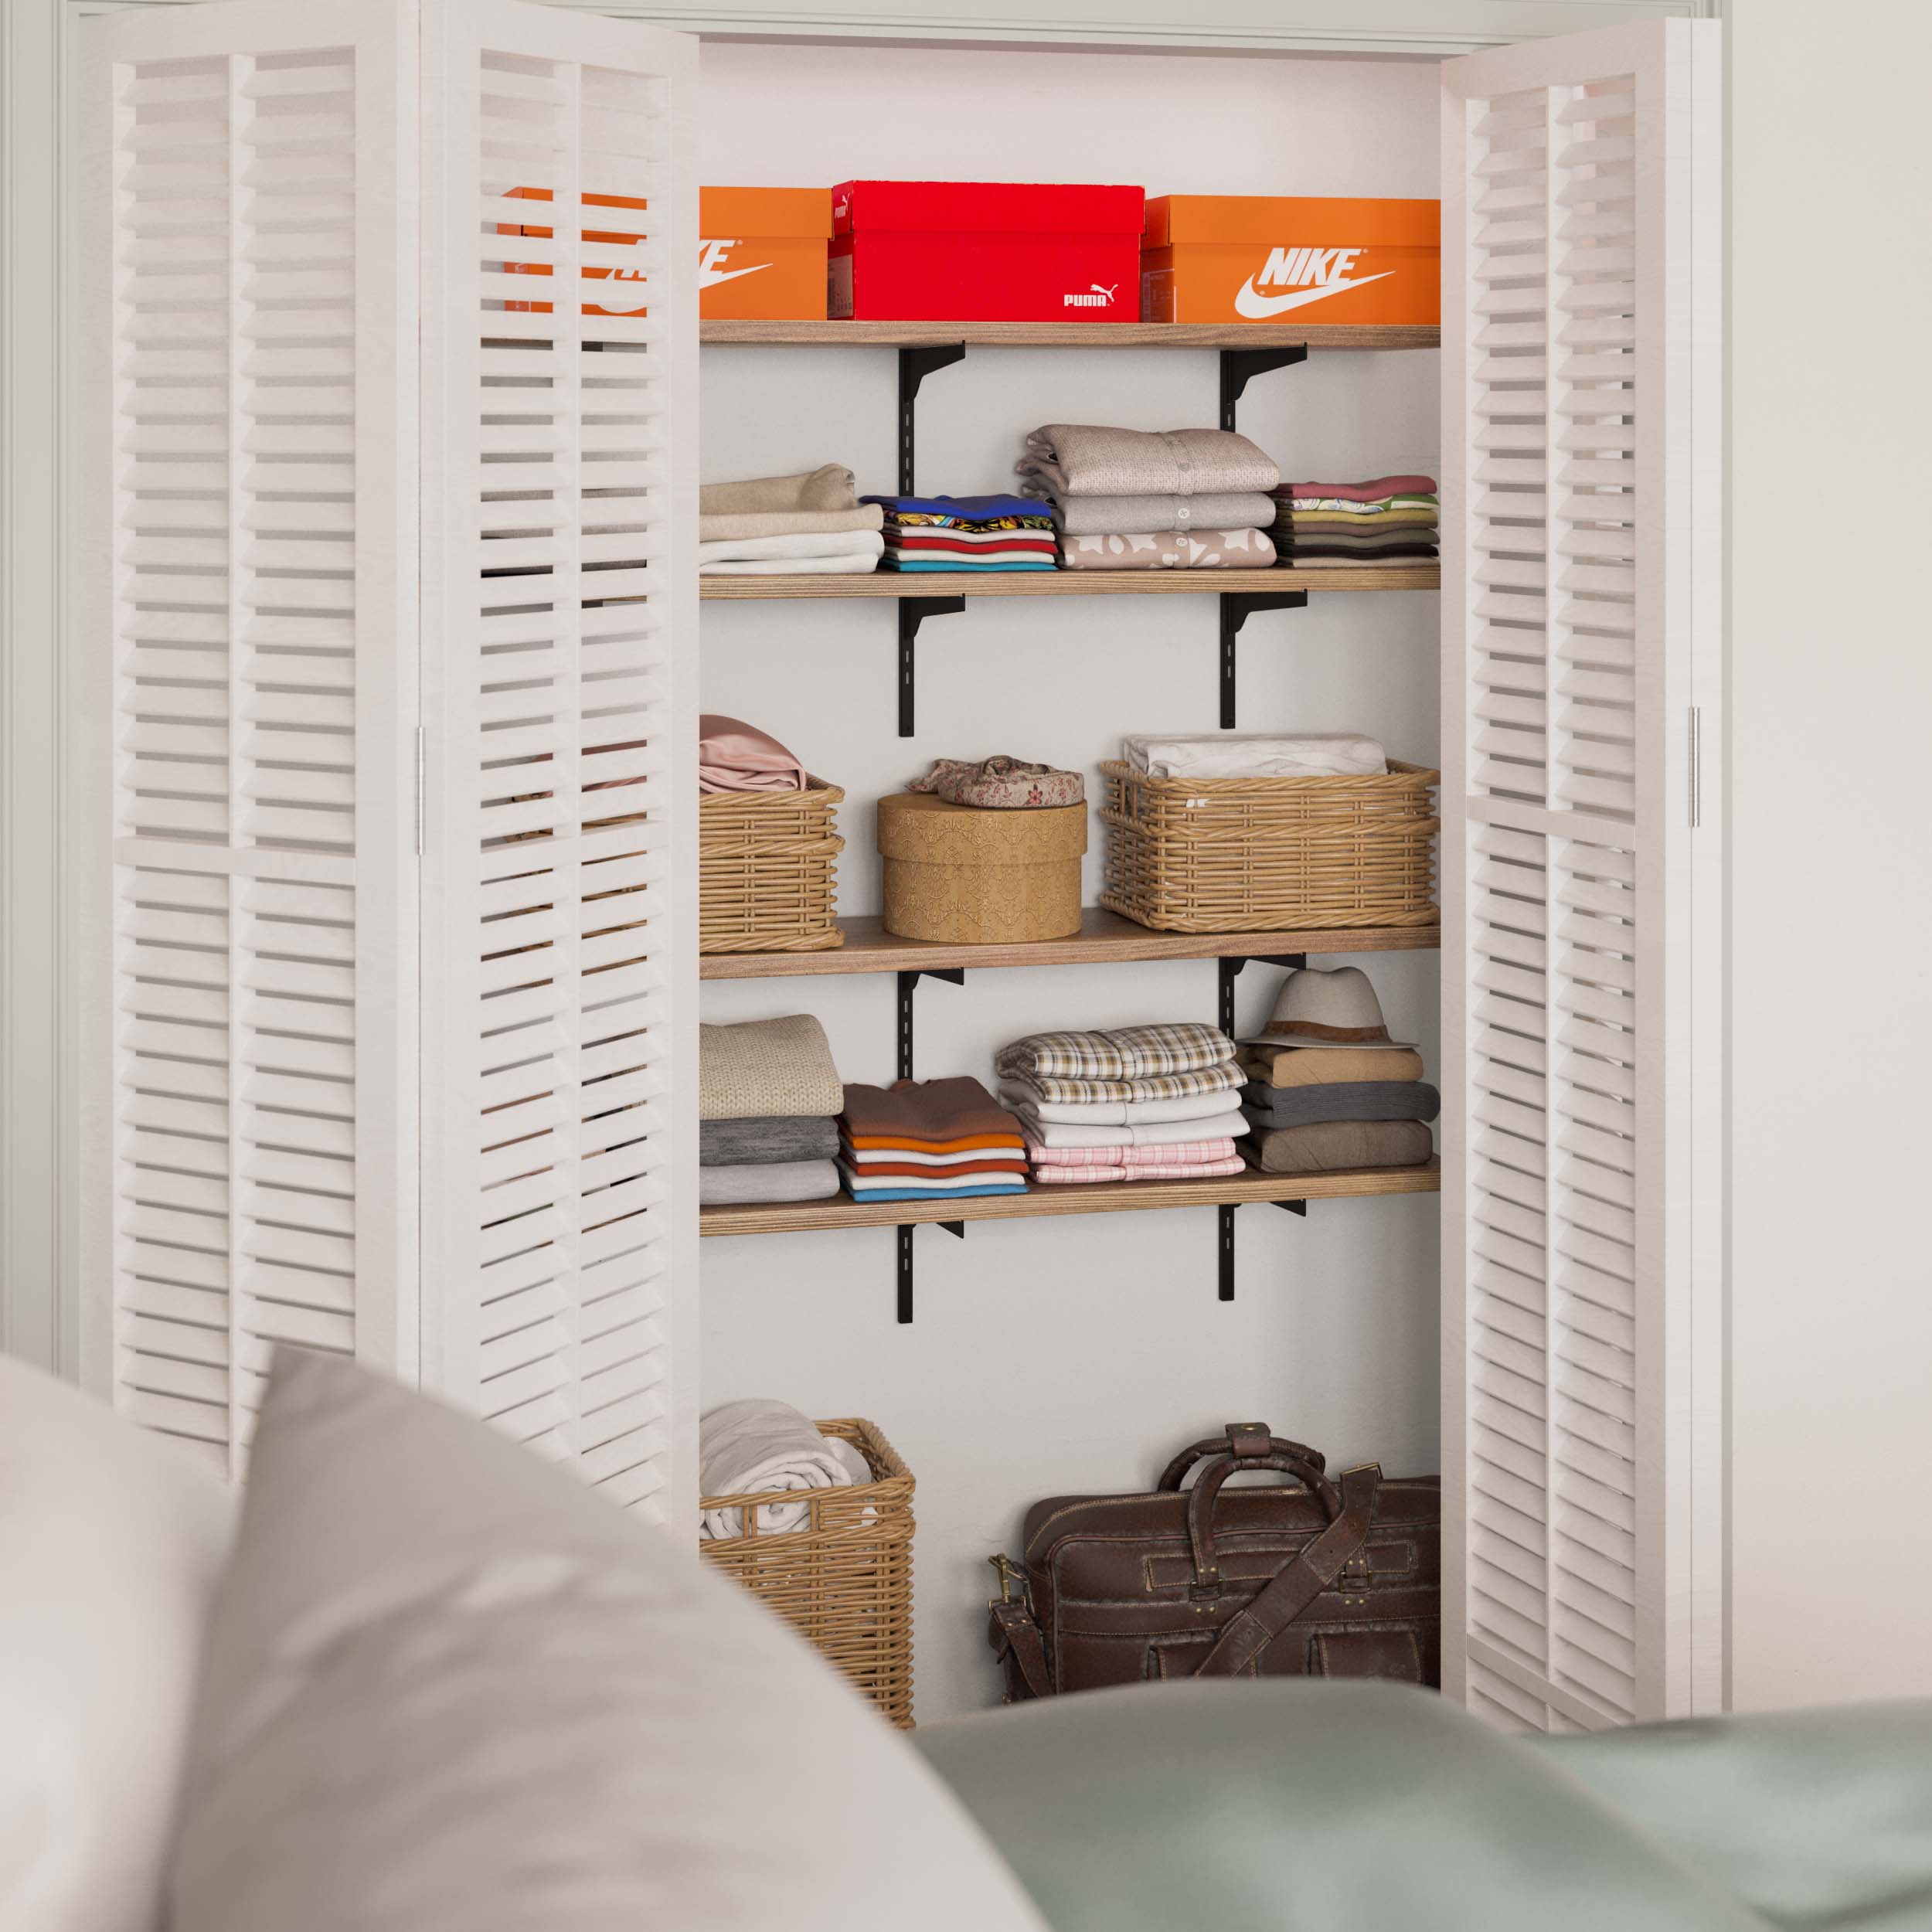 Open closet with organizer shelves organized with clothes, boxes, and baskets, offering a neat storage space.